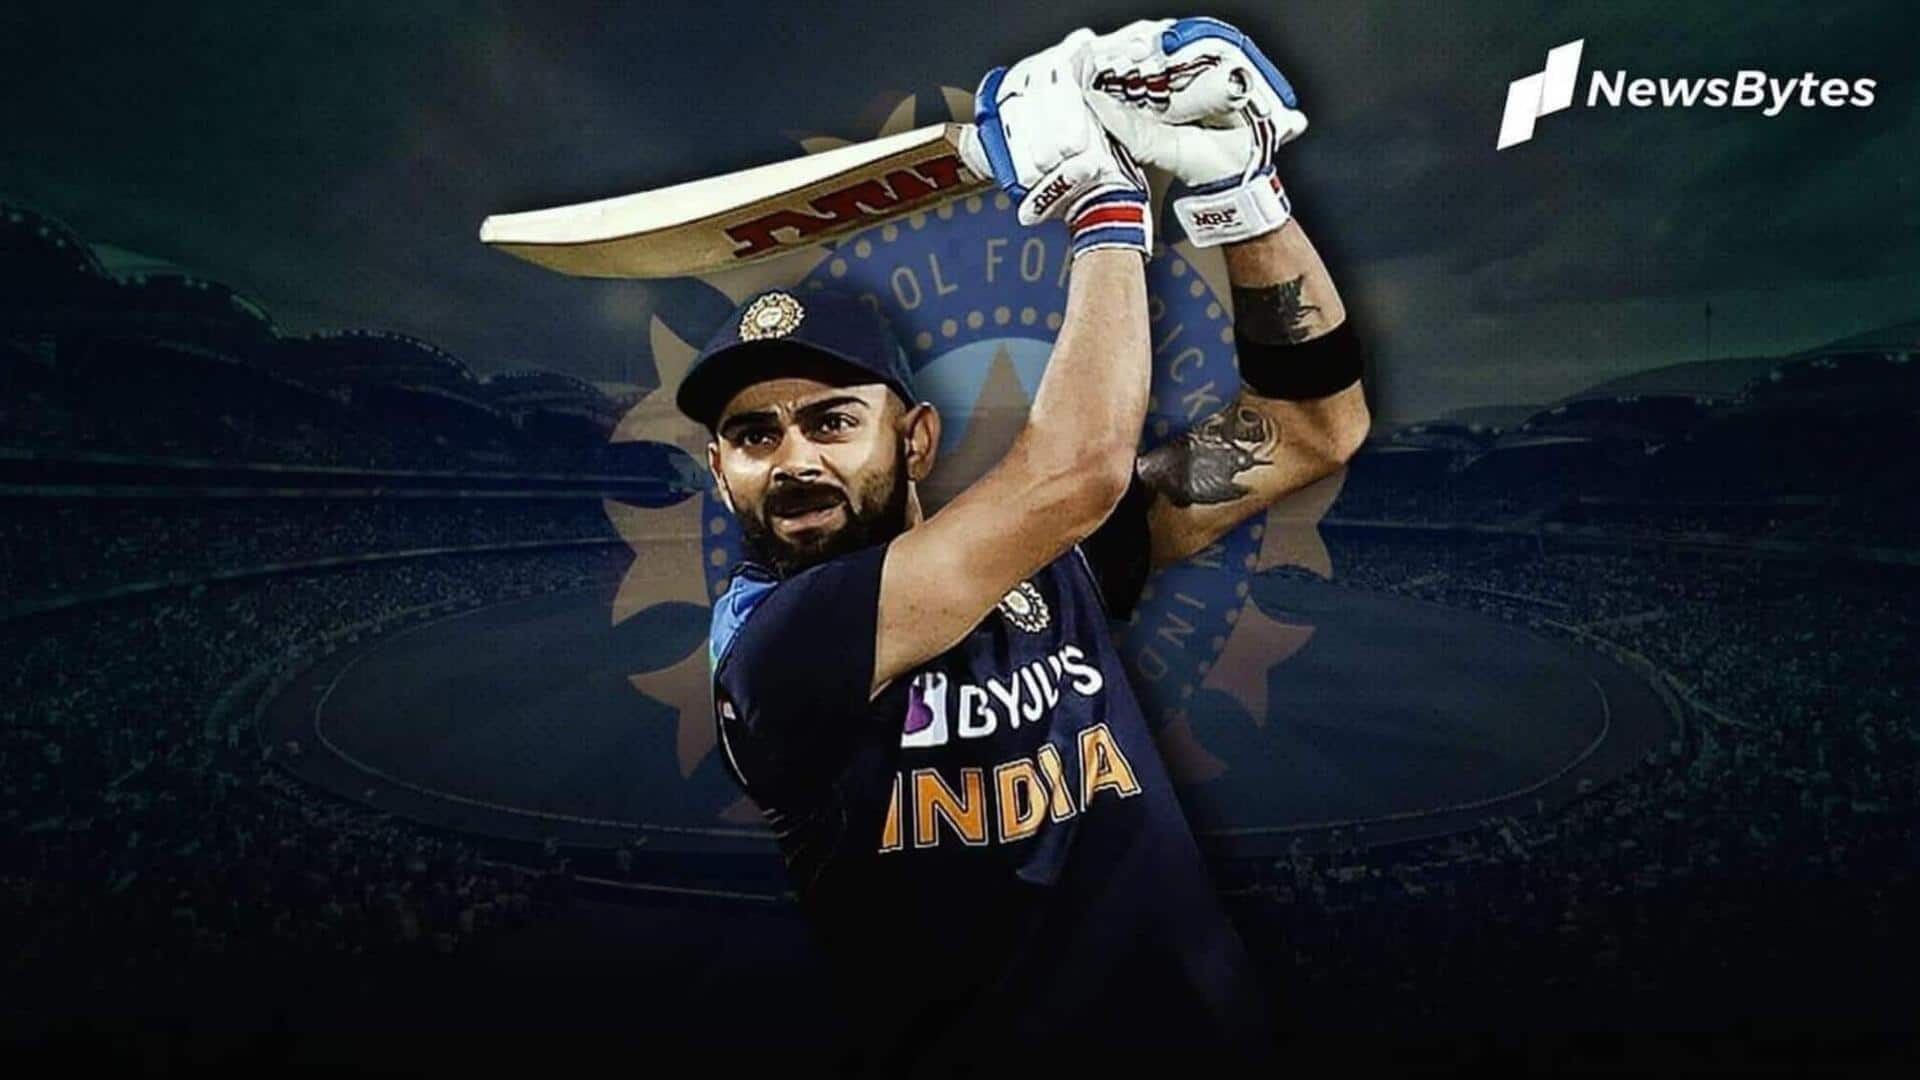 Virat Kohli becomes first Indian with 12,000 T20 runs: Stats